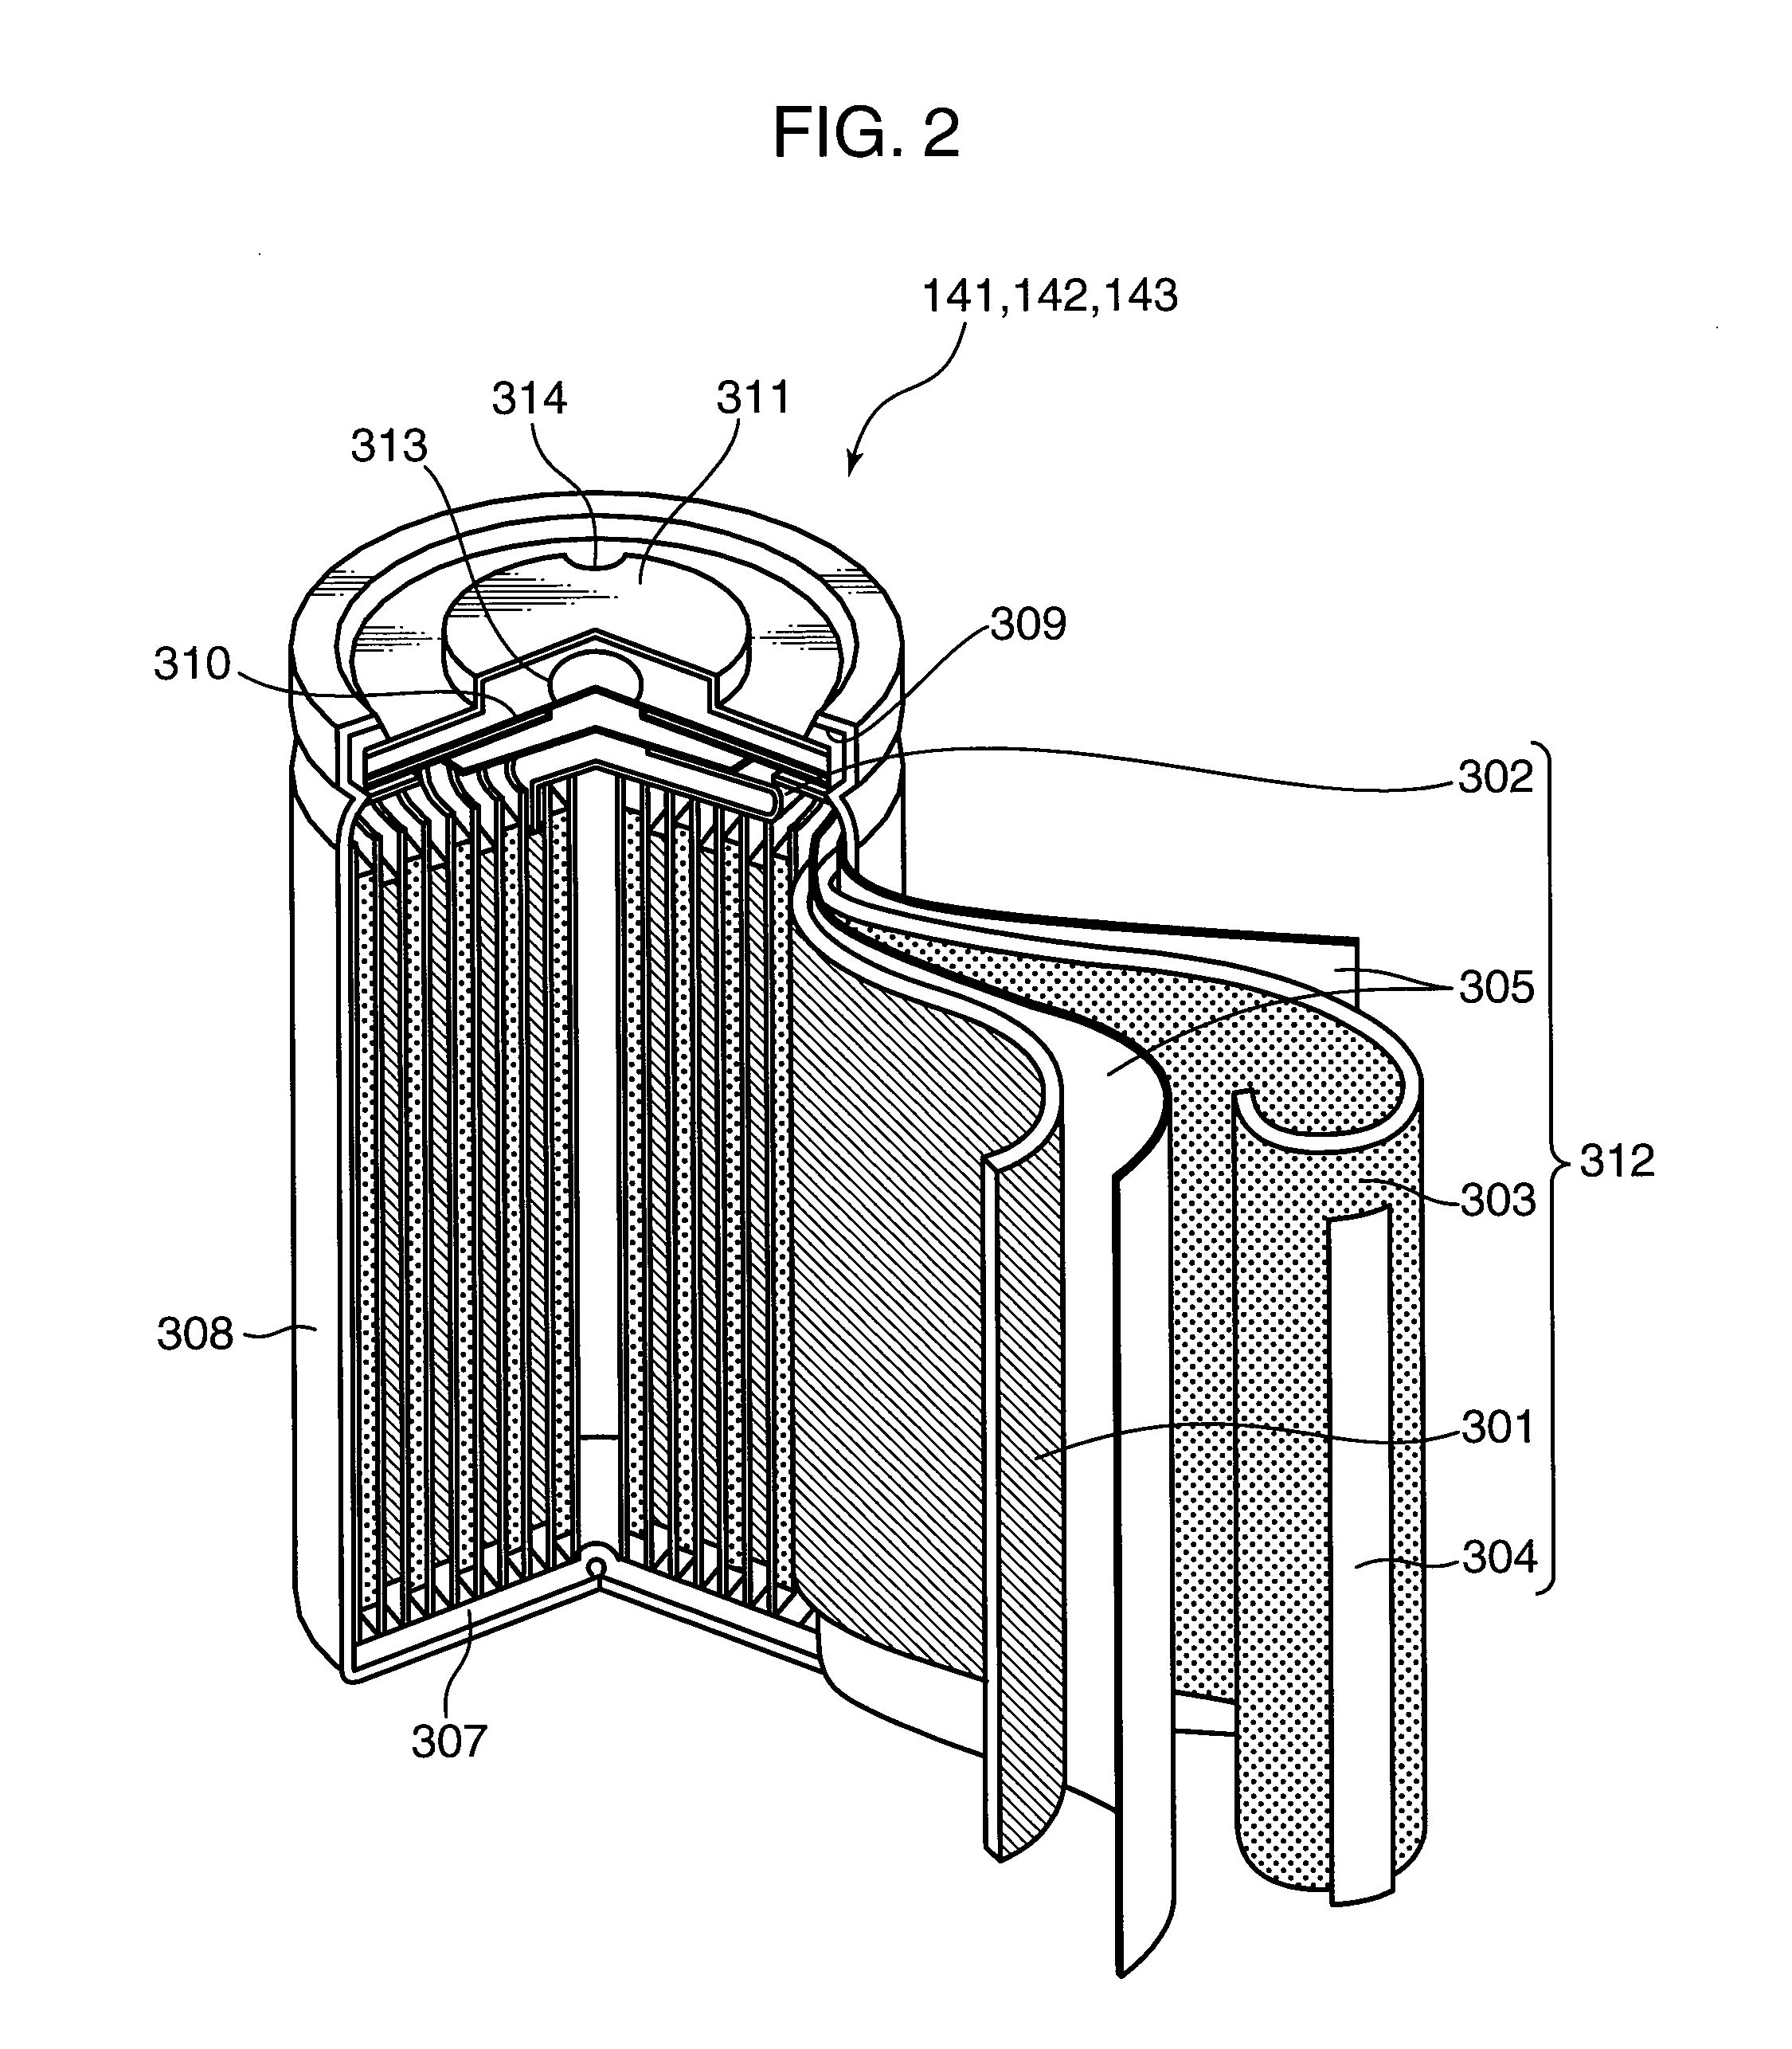 Nonaqueous secondary battery, battery pack, power supply system, and electrical device